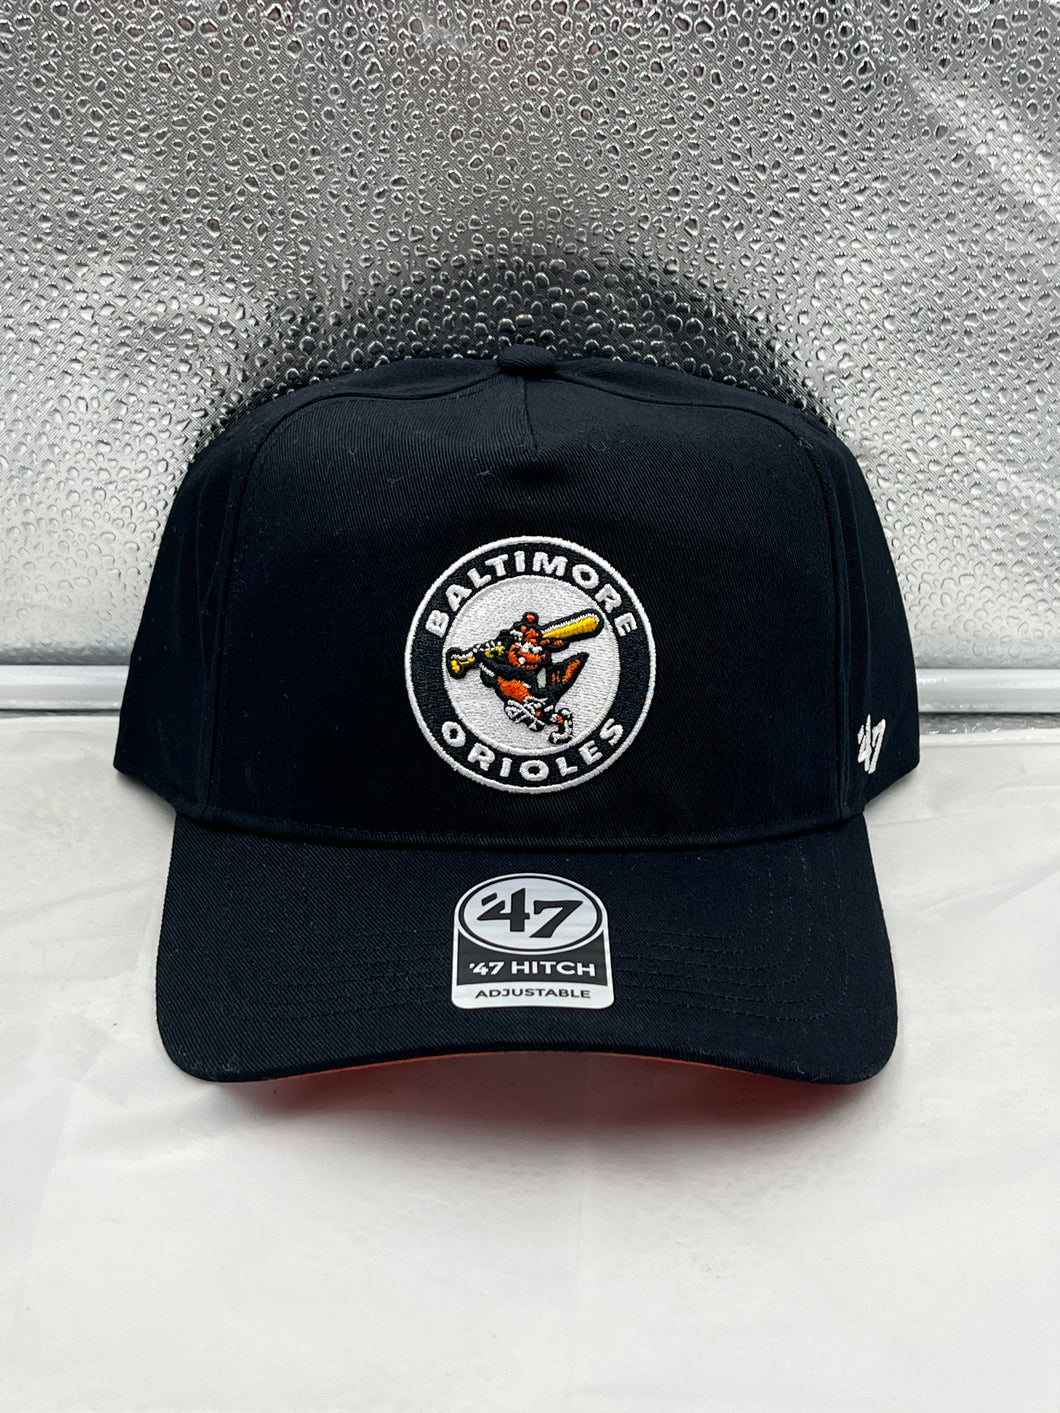 Baltimore Orioles Throwback MLB '47 Brand Black Hitch Adjustable Snapback Hat - Casey's Sports Store